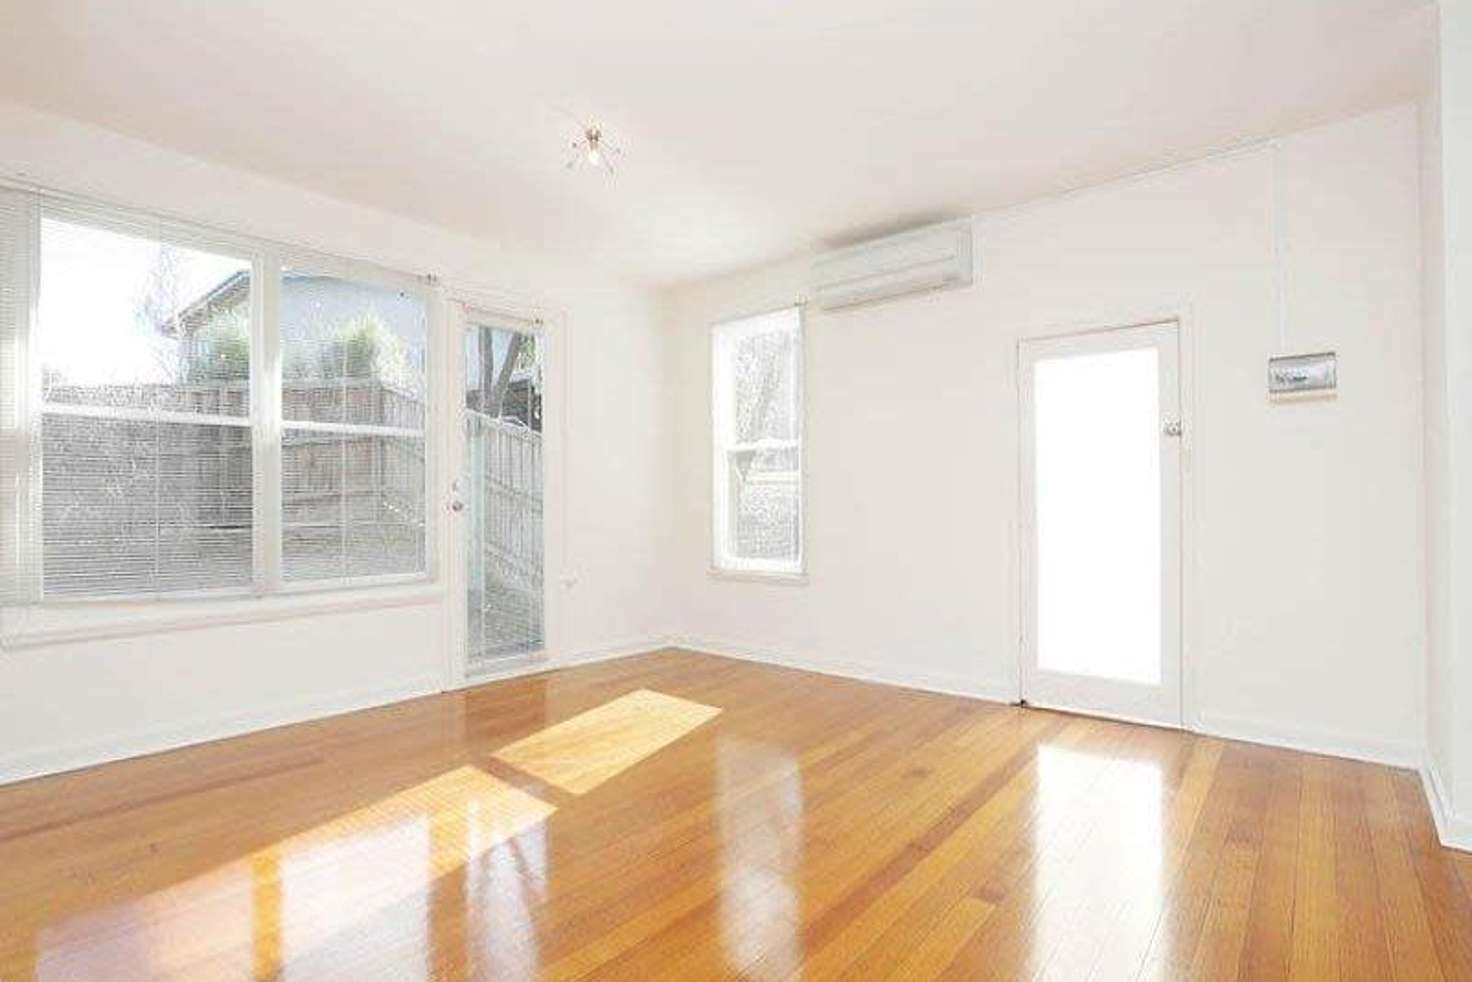 Main view of Homely apartment listing, 19/3 Bickleigh Street, Glen Iris VIC 3146